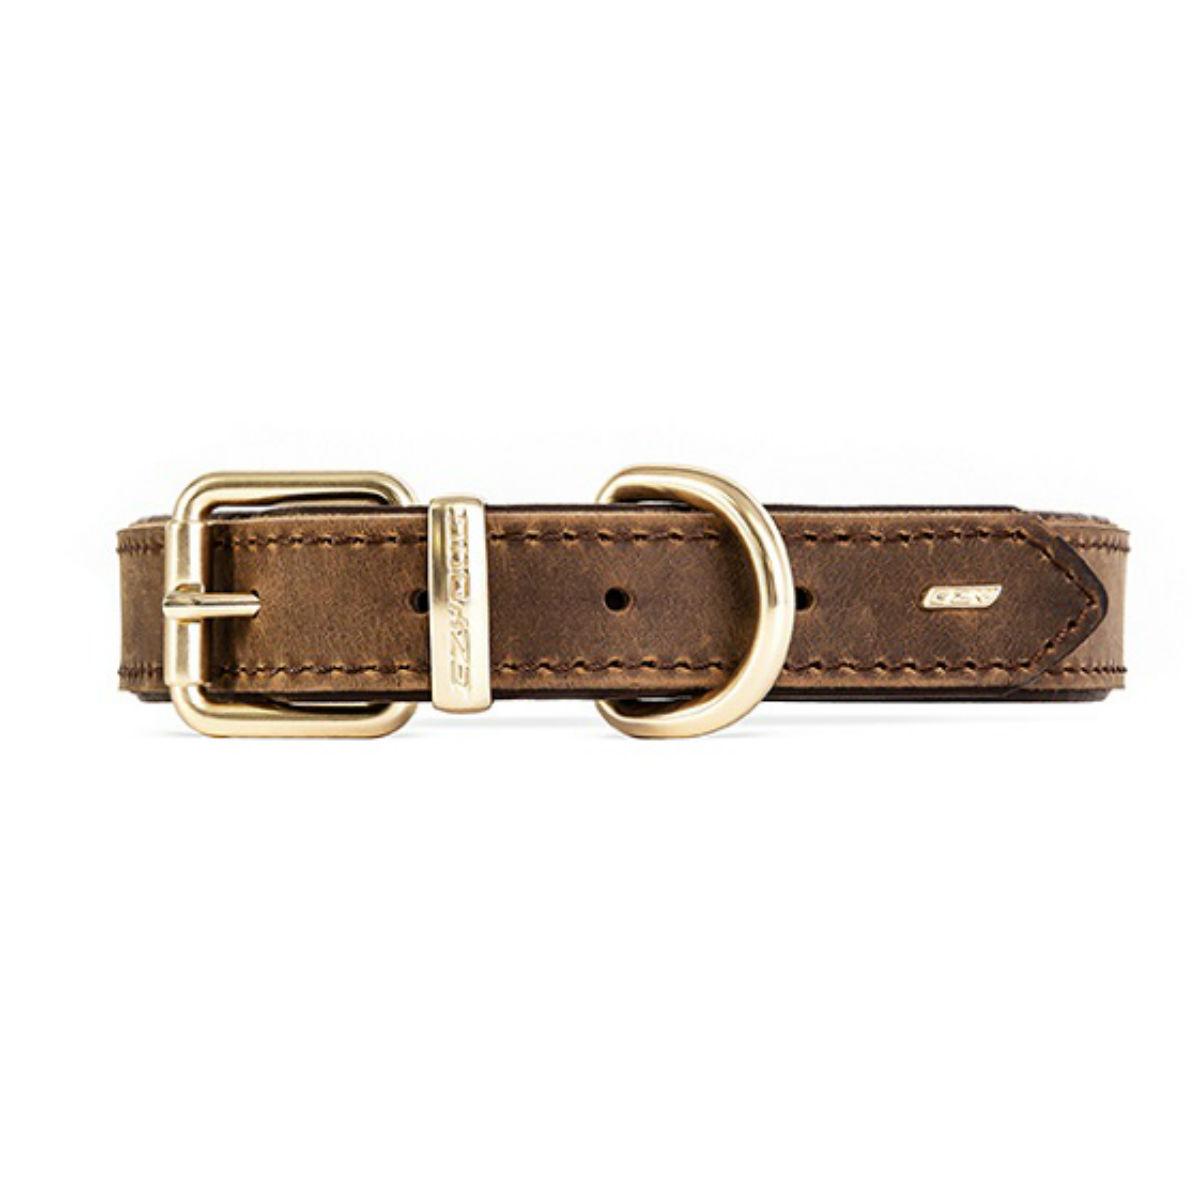 Oxford Brown Leather Dog Collar - Small